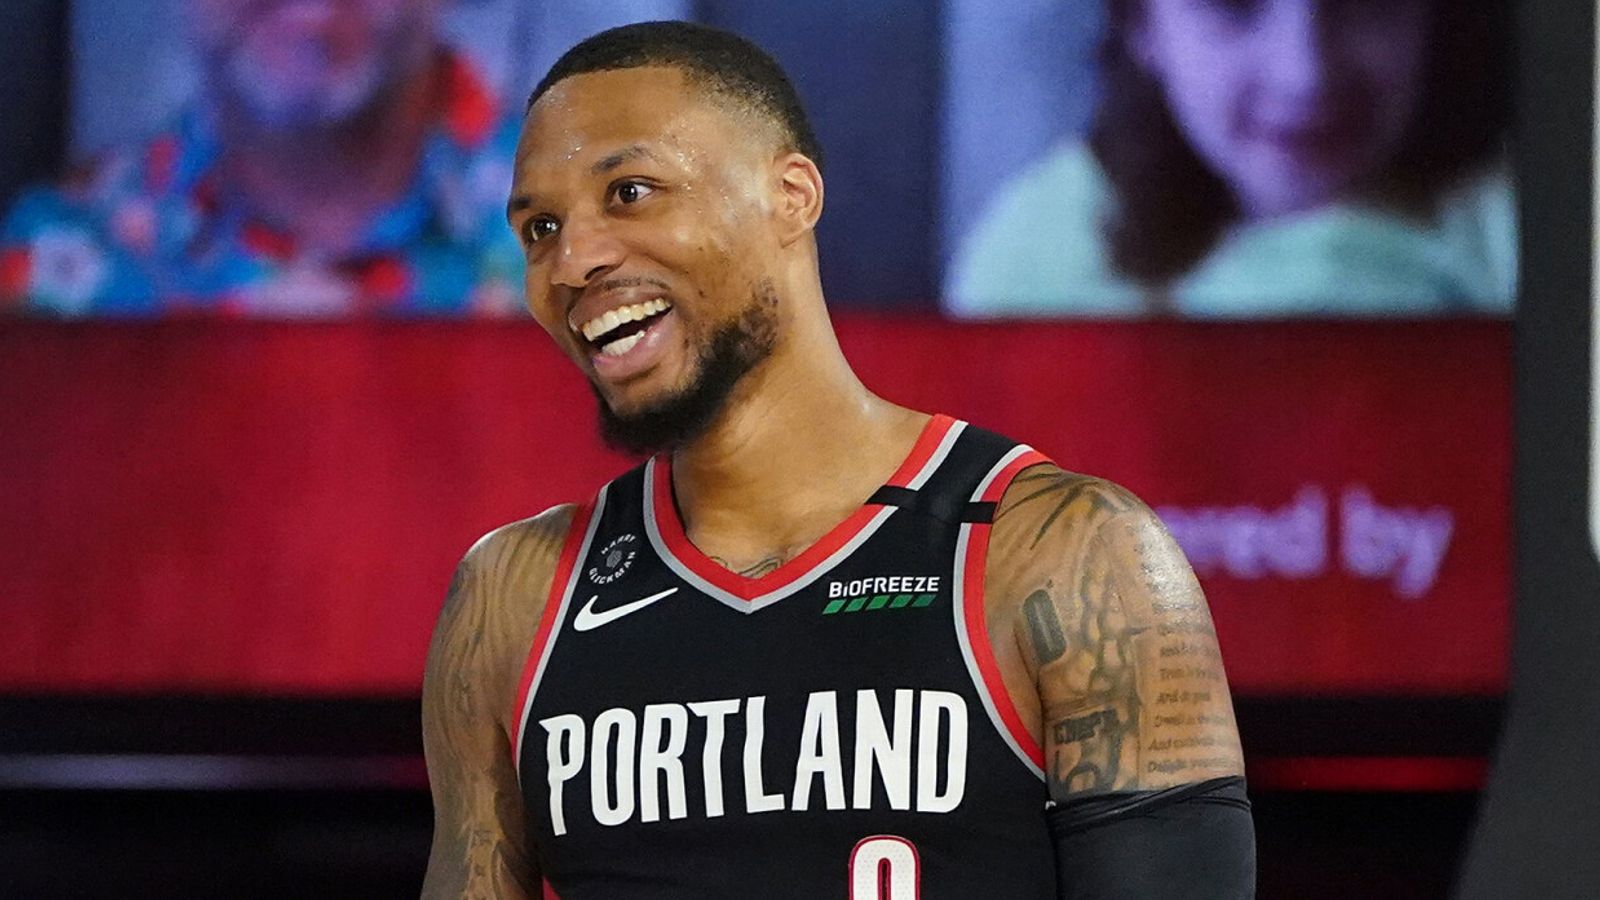 Damian Lillard Sets the Record Straight Amid Playoff Pressures and Personal Strife